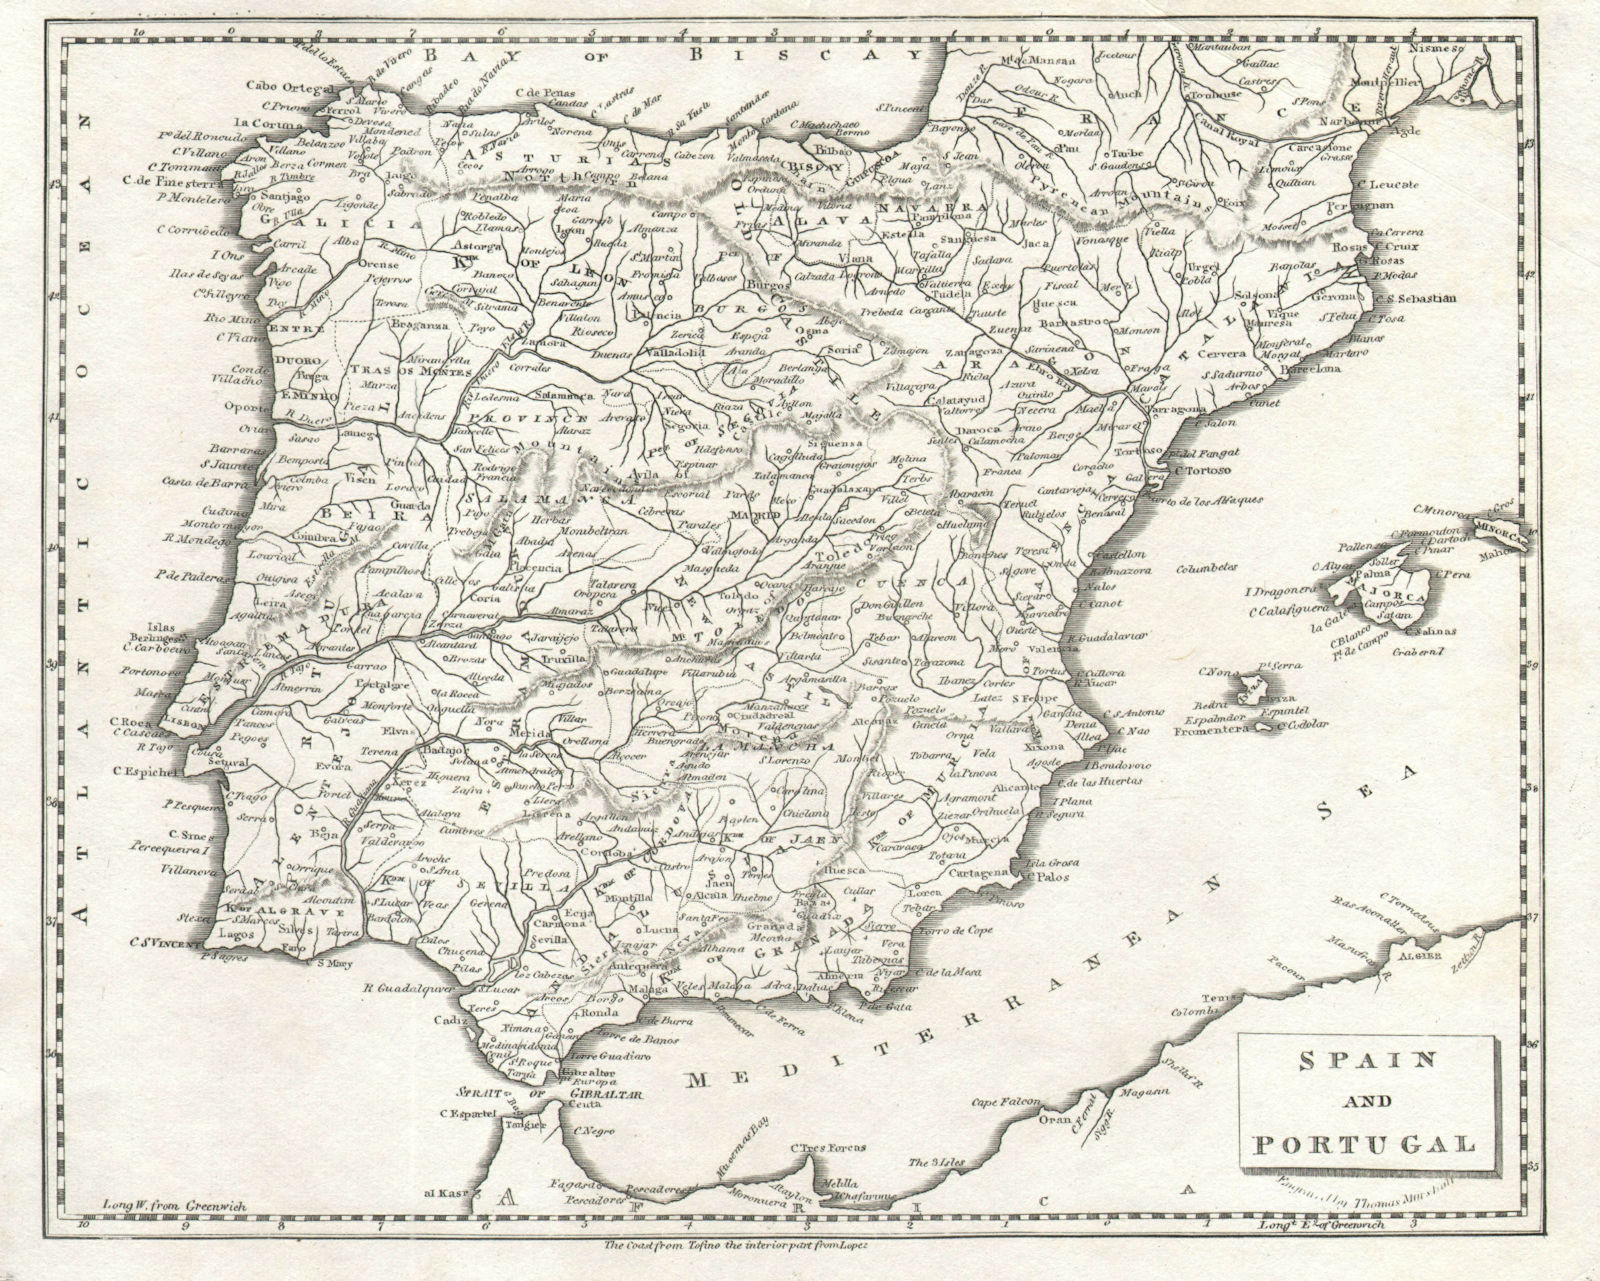 Associate Product Spain and Portugal by Arrowsmith & Lewis. Iberia 1812 old antique map chart